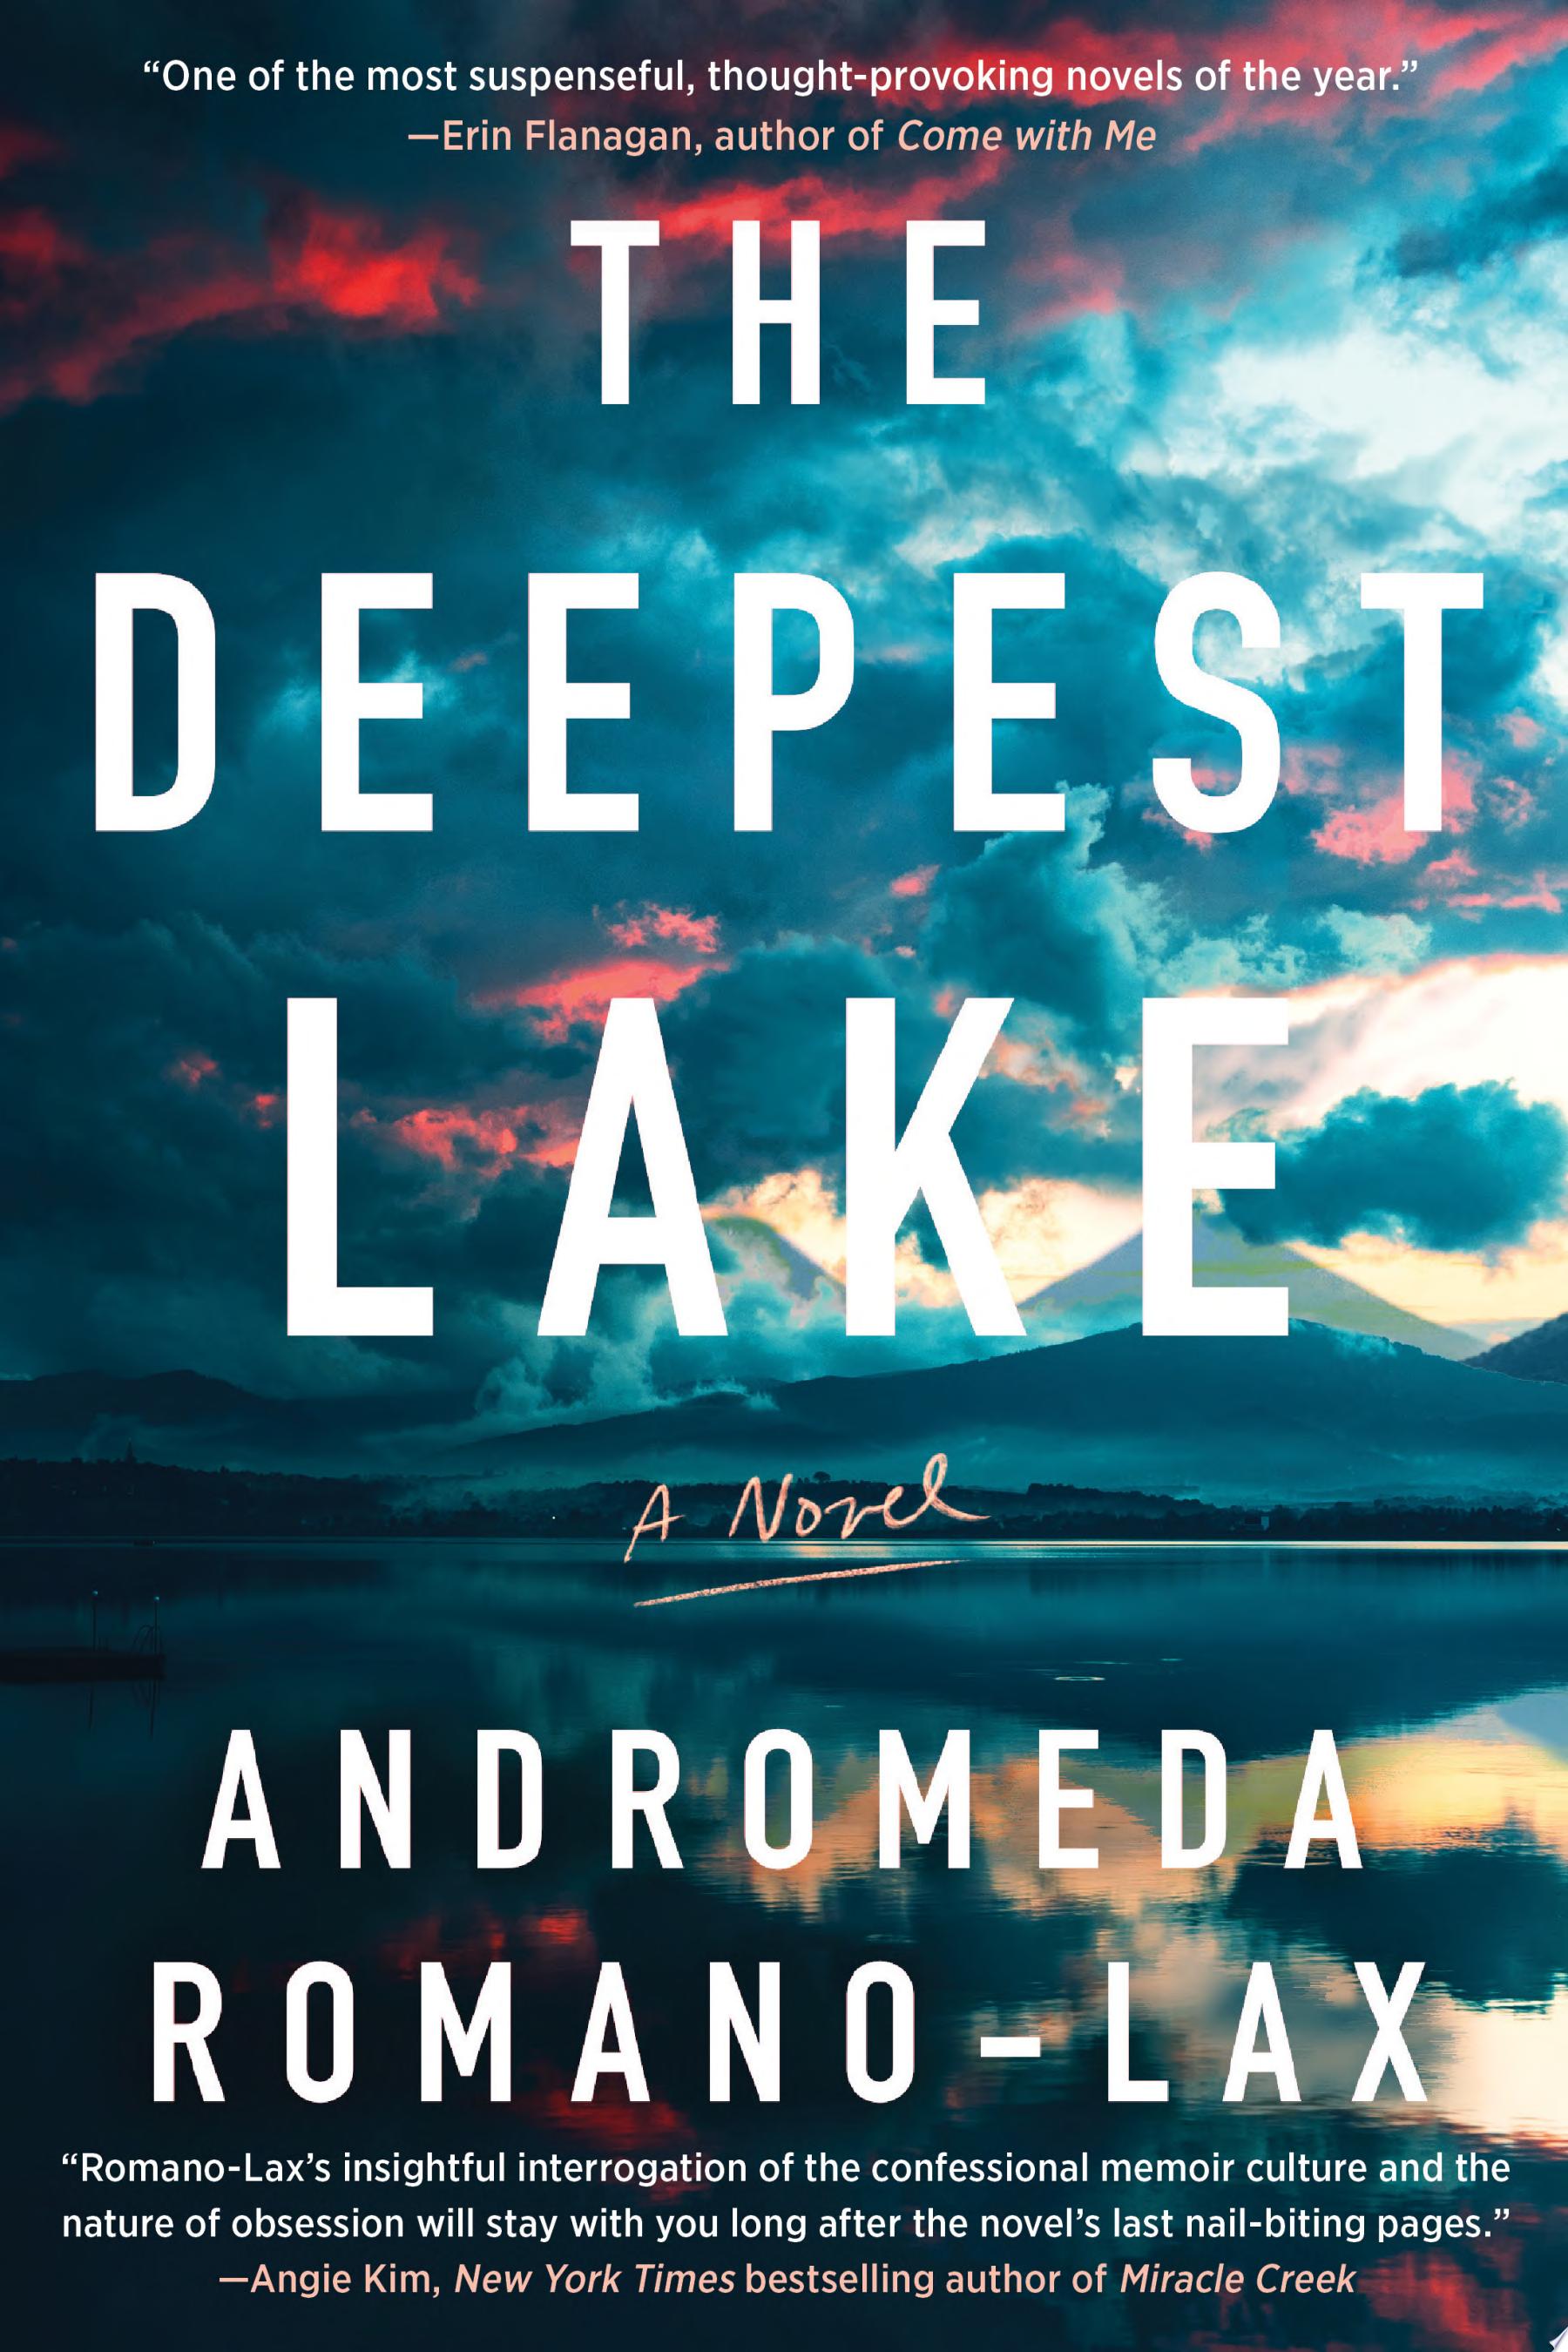 Image for "The Deepest Lake" by Andromeda Romano-Lax